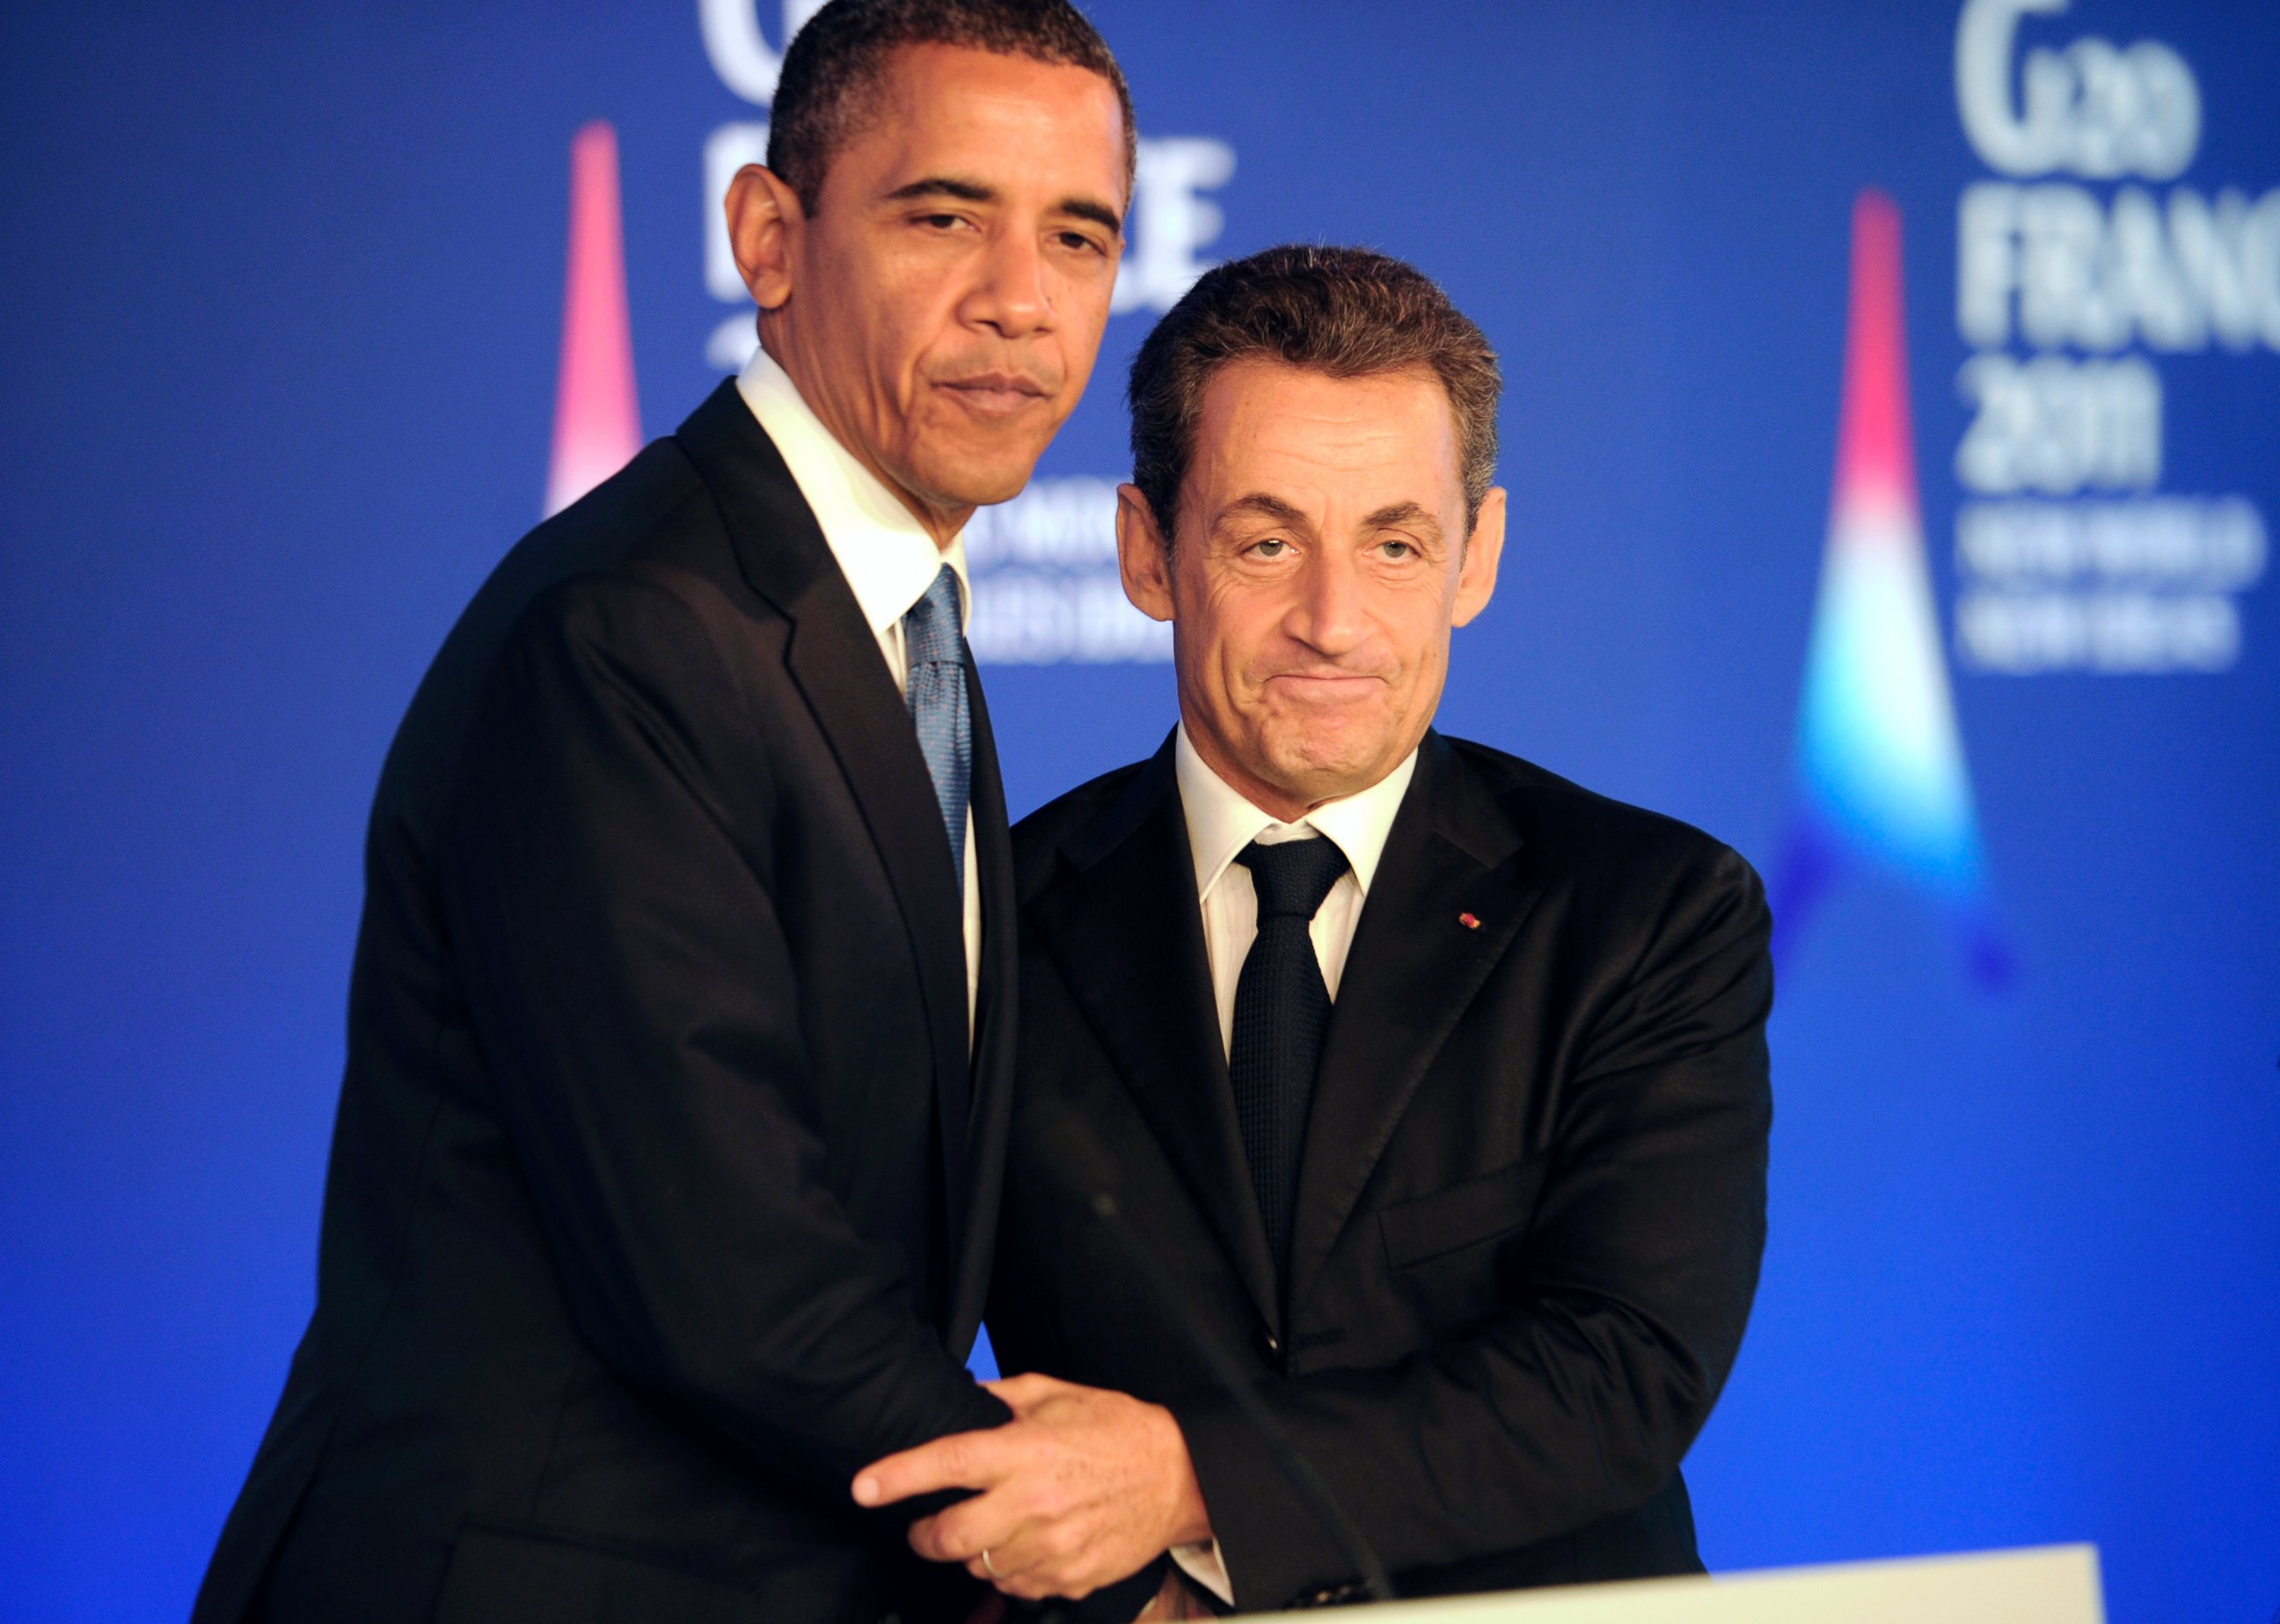 PHOTO: Barack Obama, left, and Nicolas Sarkozy shake hands as they hold a joint press conference, ahead of the start of the G20 Summit, Nov. 3, 2011, in Cannes, France.  